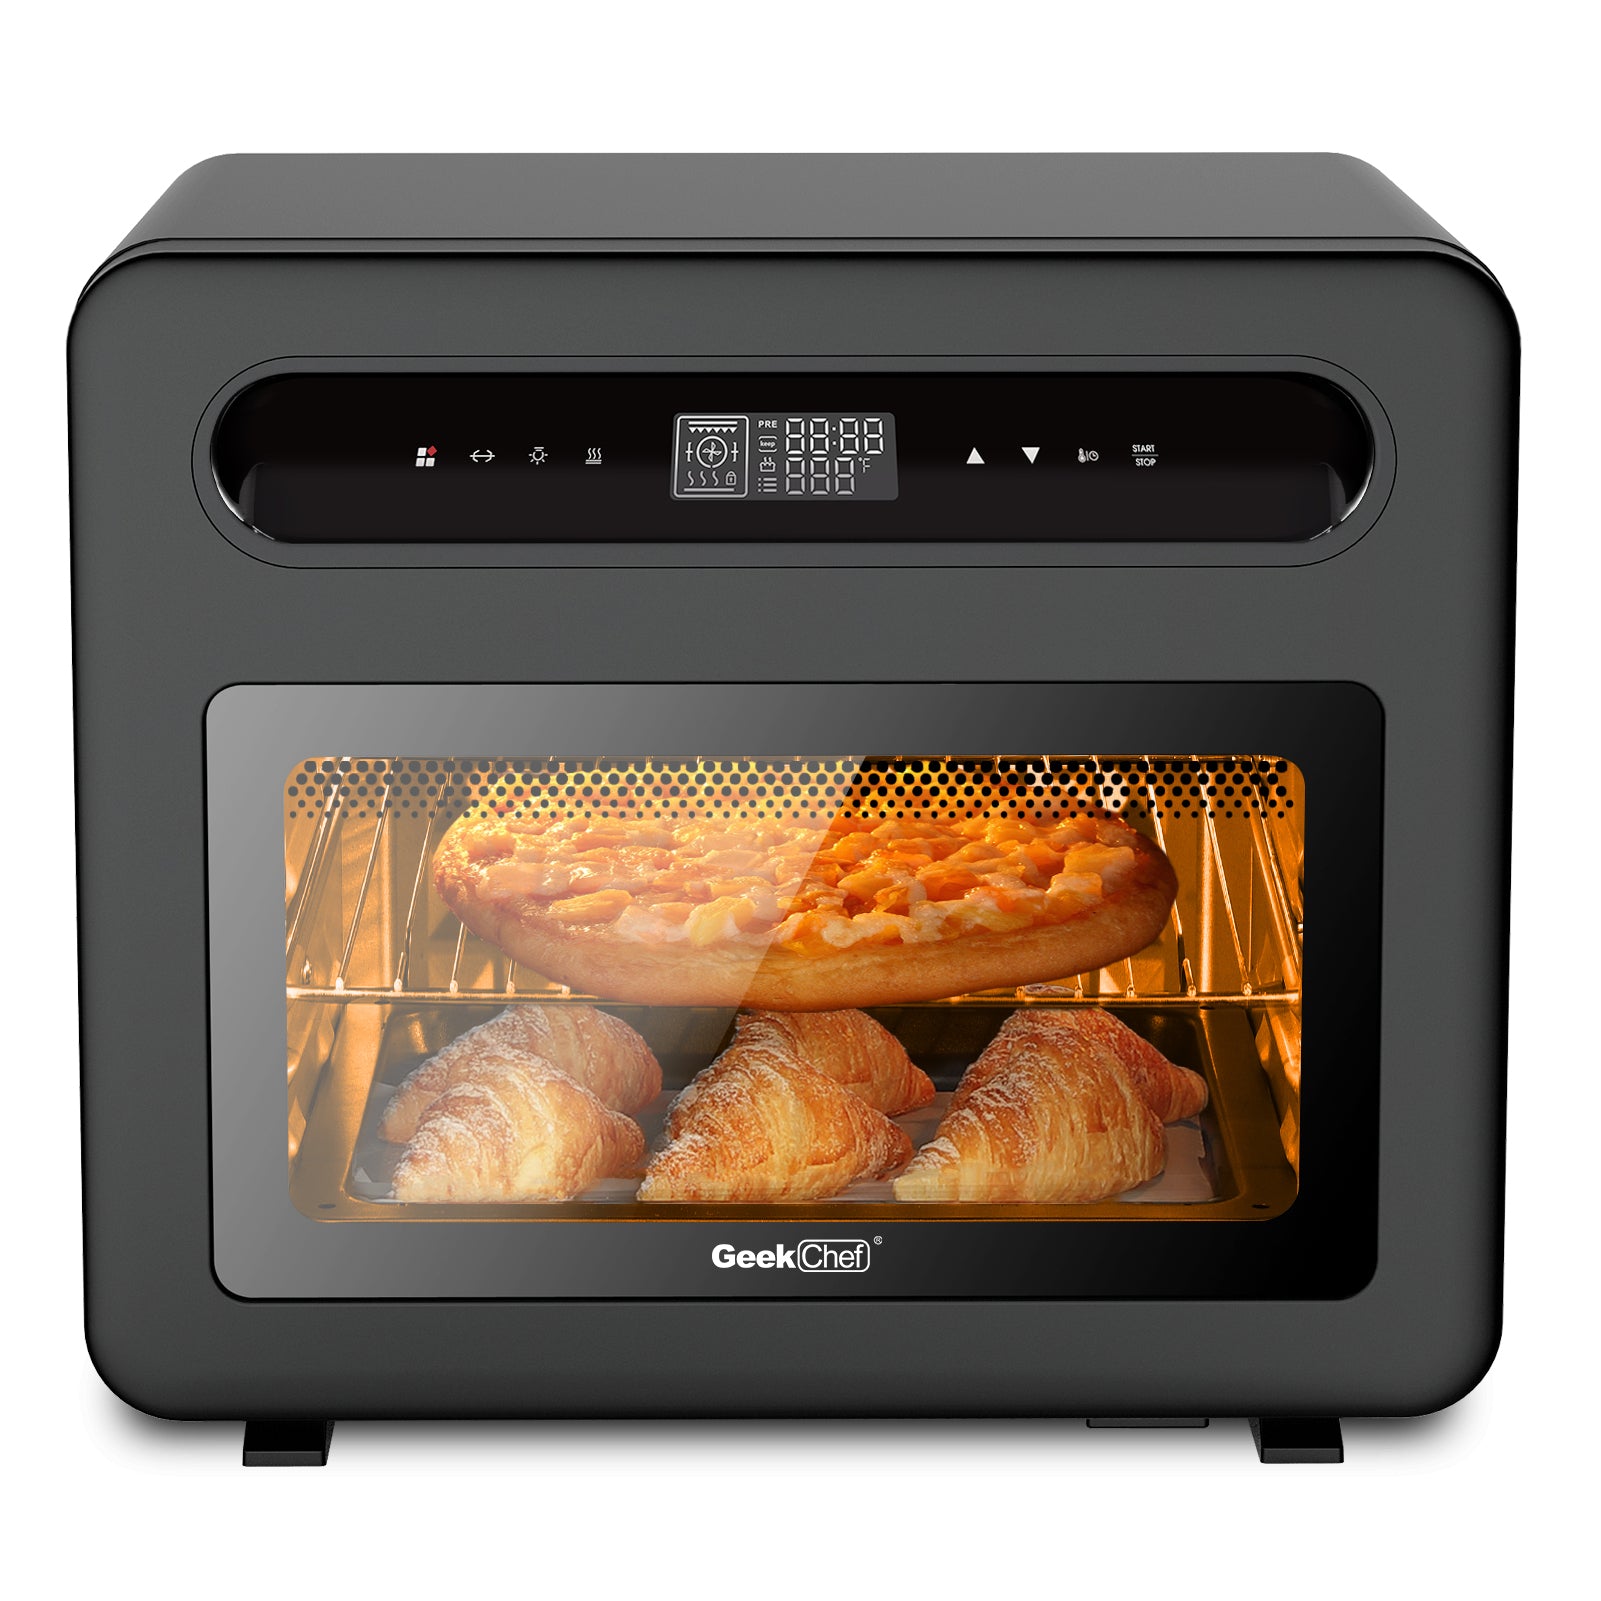 Geek Chef Steam Air Fryer Toast Oven Combo , 26 QT Steam Convection Oven Countertop , 50 Cooking Presets, with 6 Slice Toast, 12" Pizza, Black Stainless Steel. Ban on Amazon - Tonkn